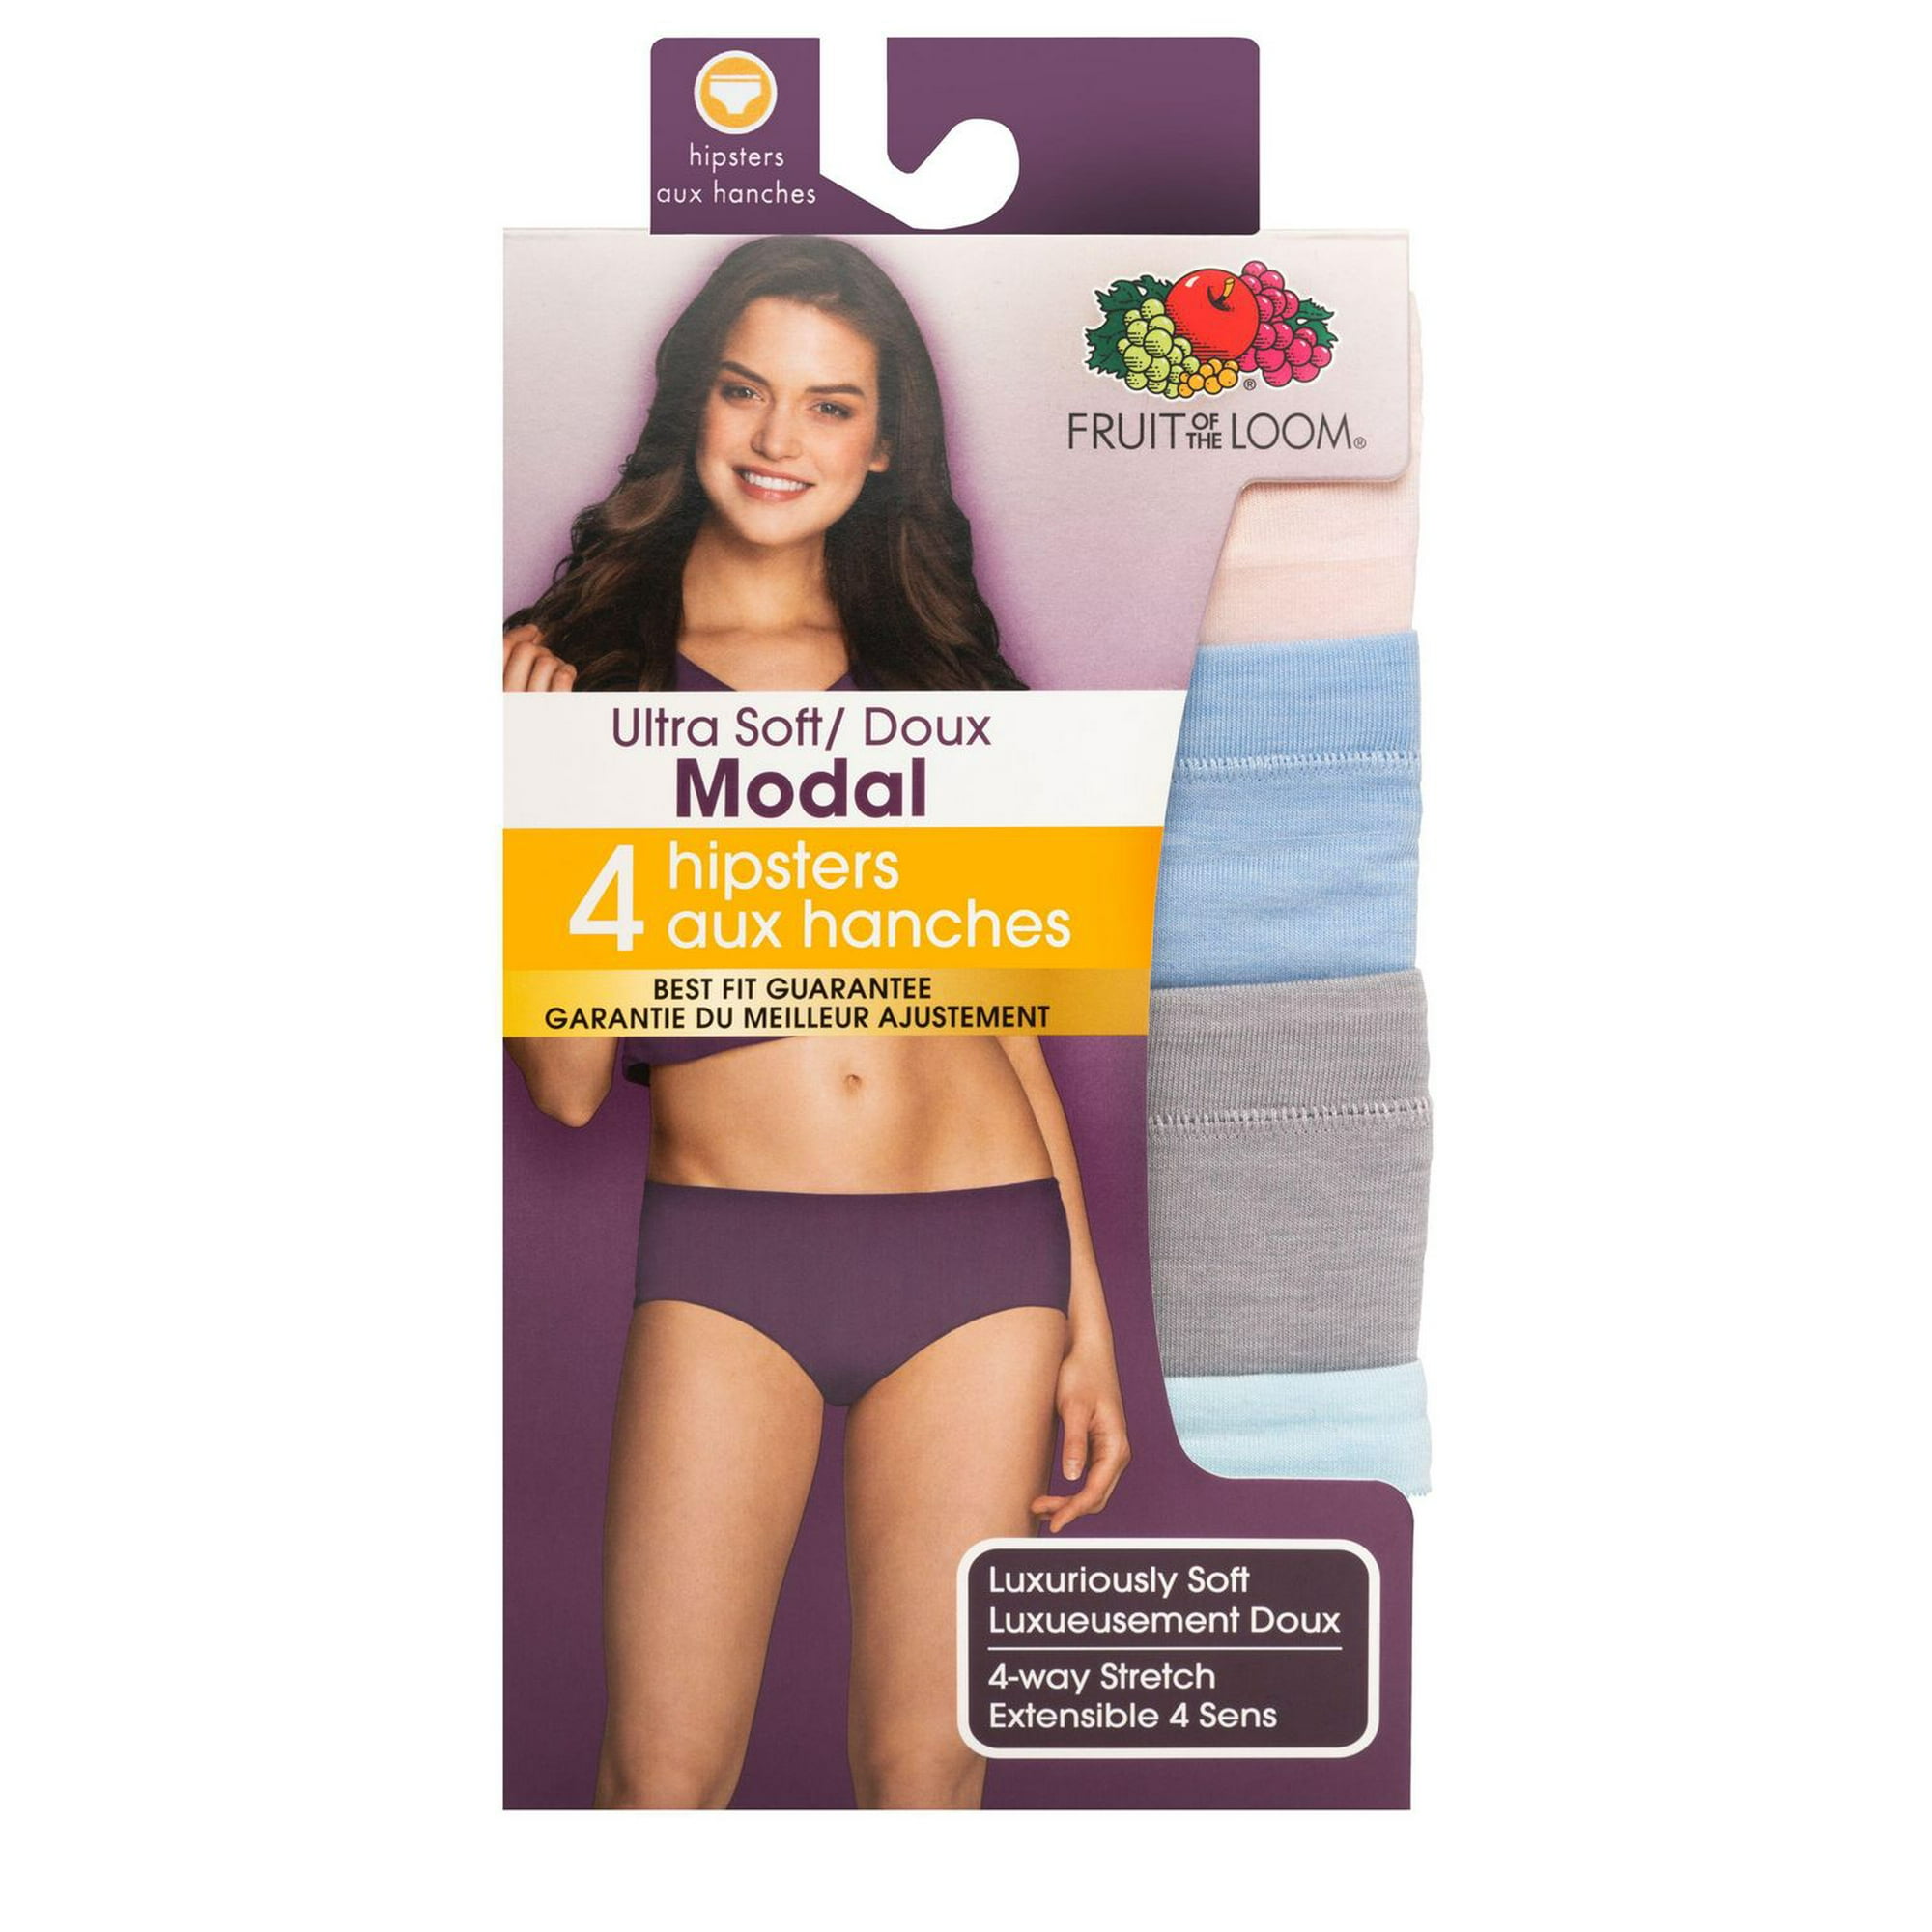 Buy Fruit Of The Loom Women Pack Of 2 Solid Hipster Briefs FHPS02